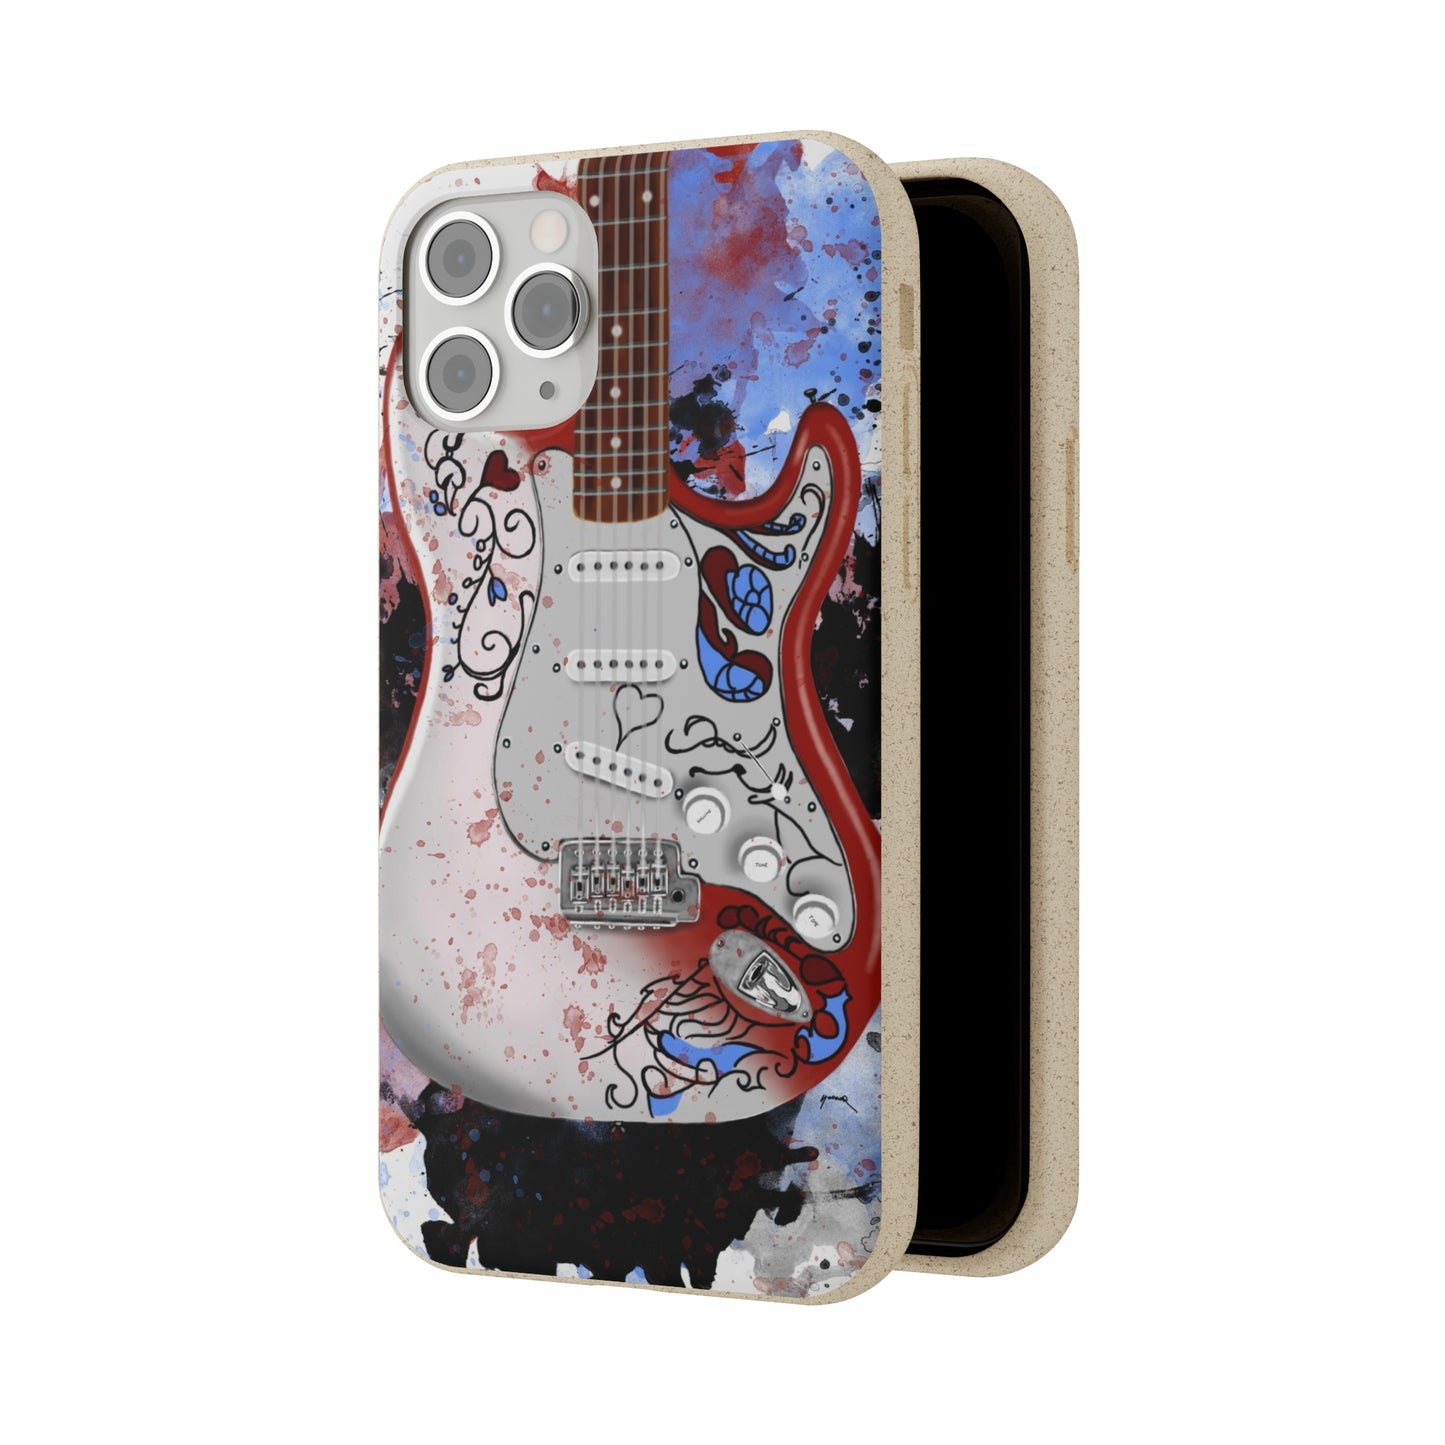 Digital painting of a red white decorated electric guitar printed on a biodegradable iphone phone case